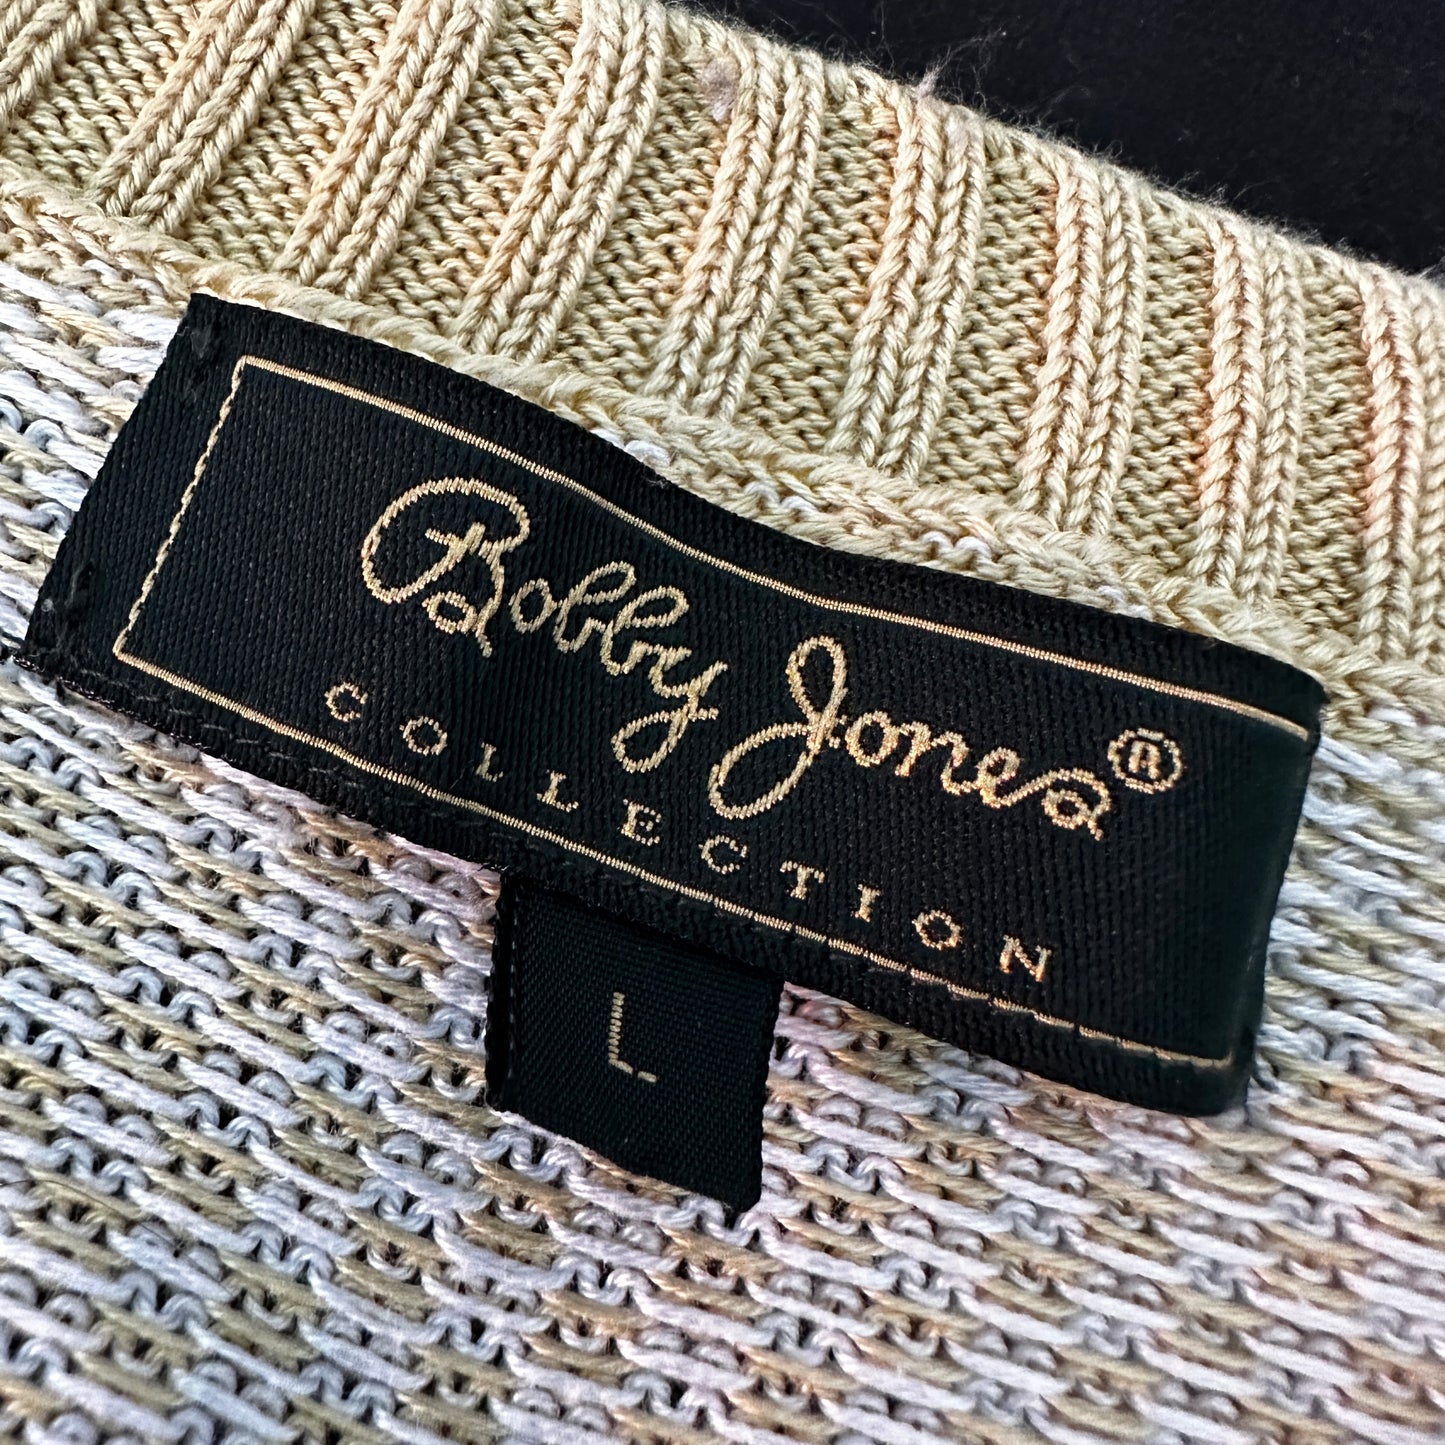 Bobby Jones Vintage 90s Sweater - L  - Made in Hong Kong